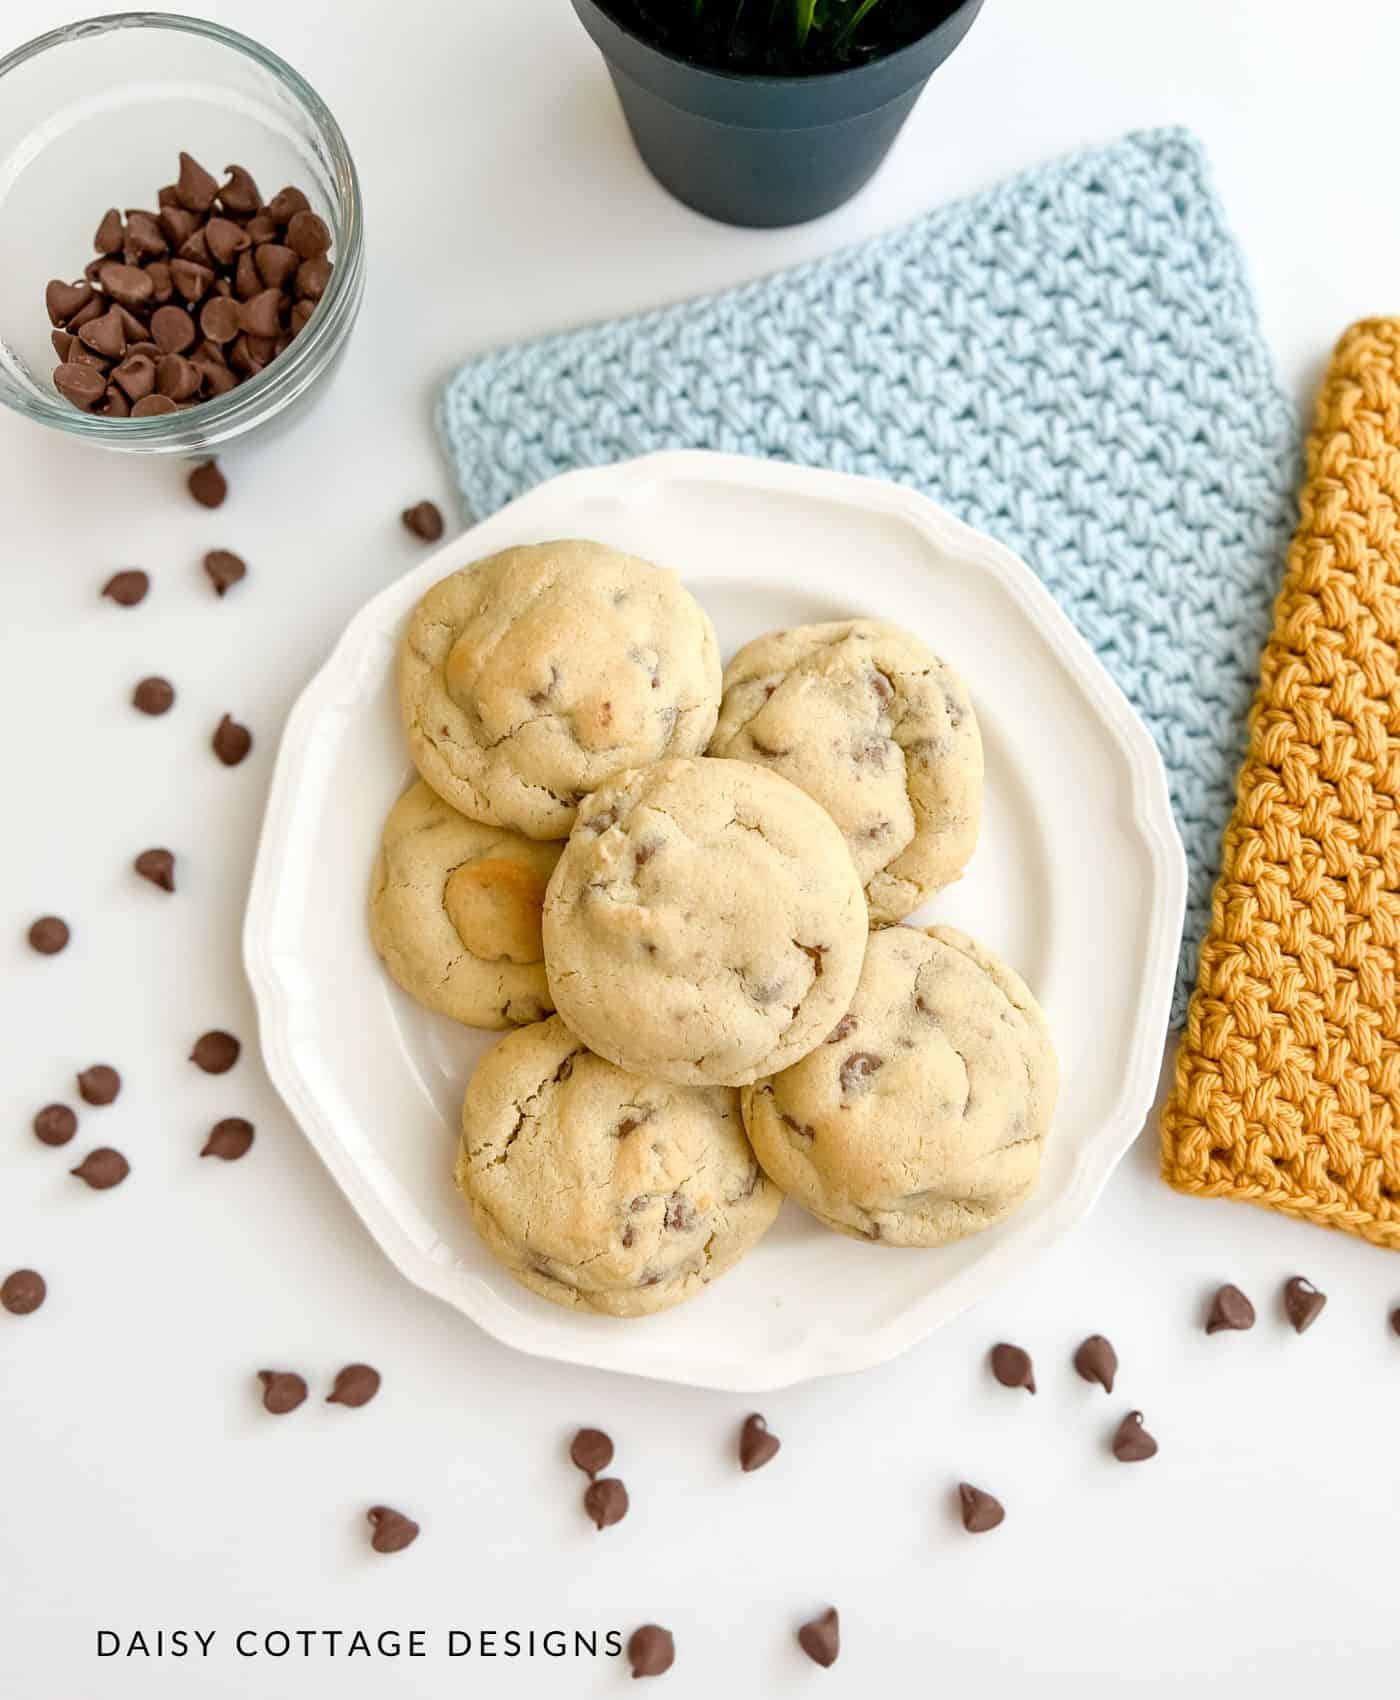 Chocolate chip cookies and crochet dishcloths